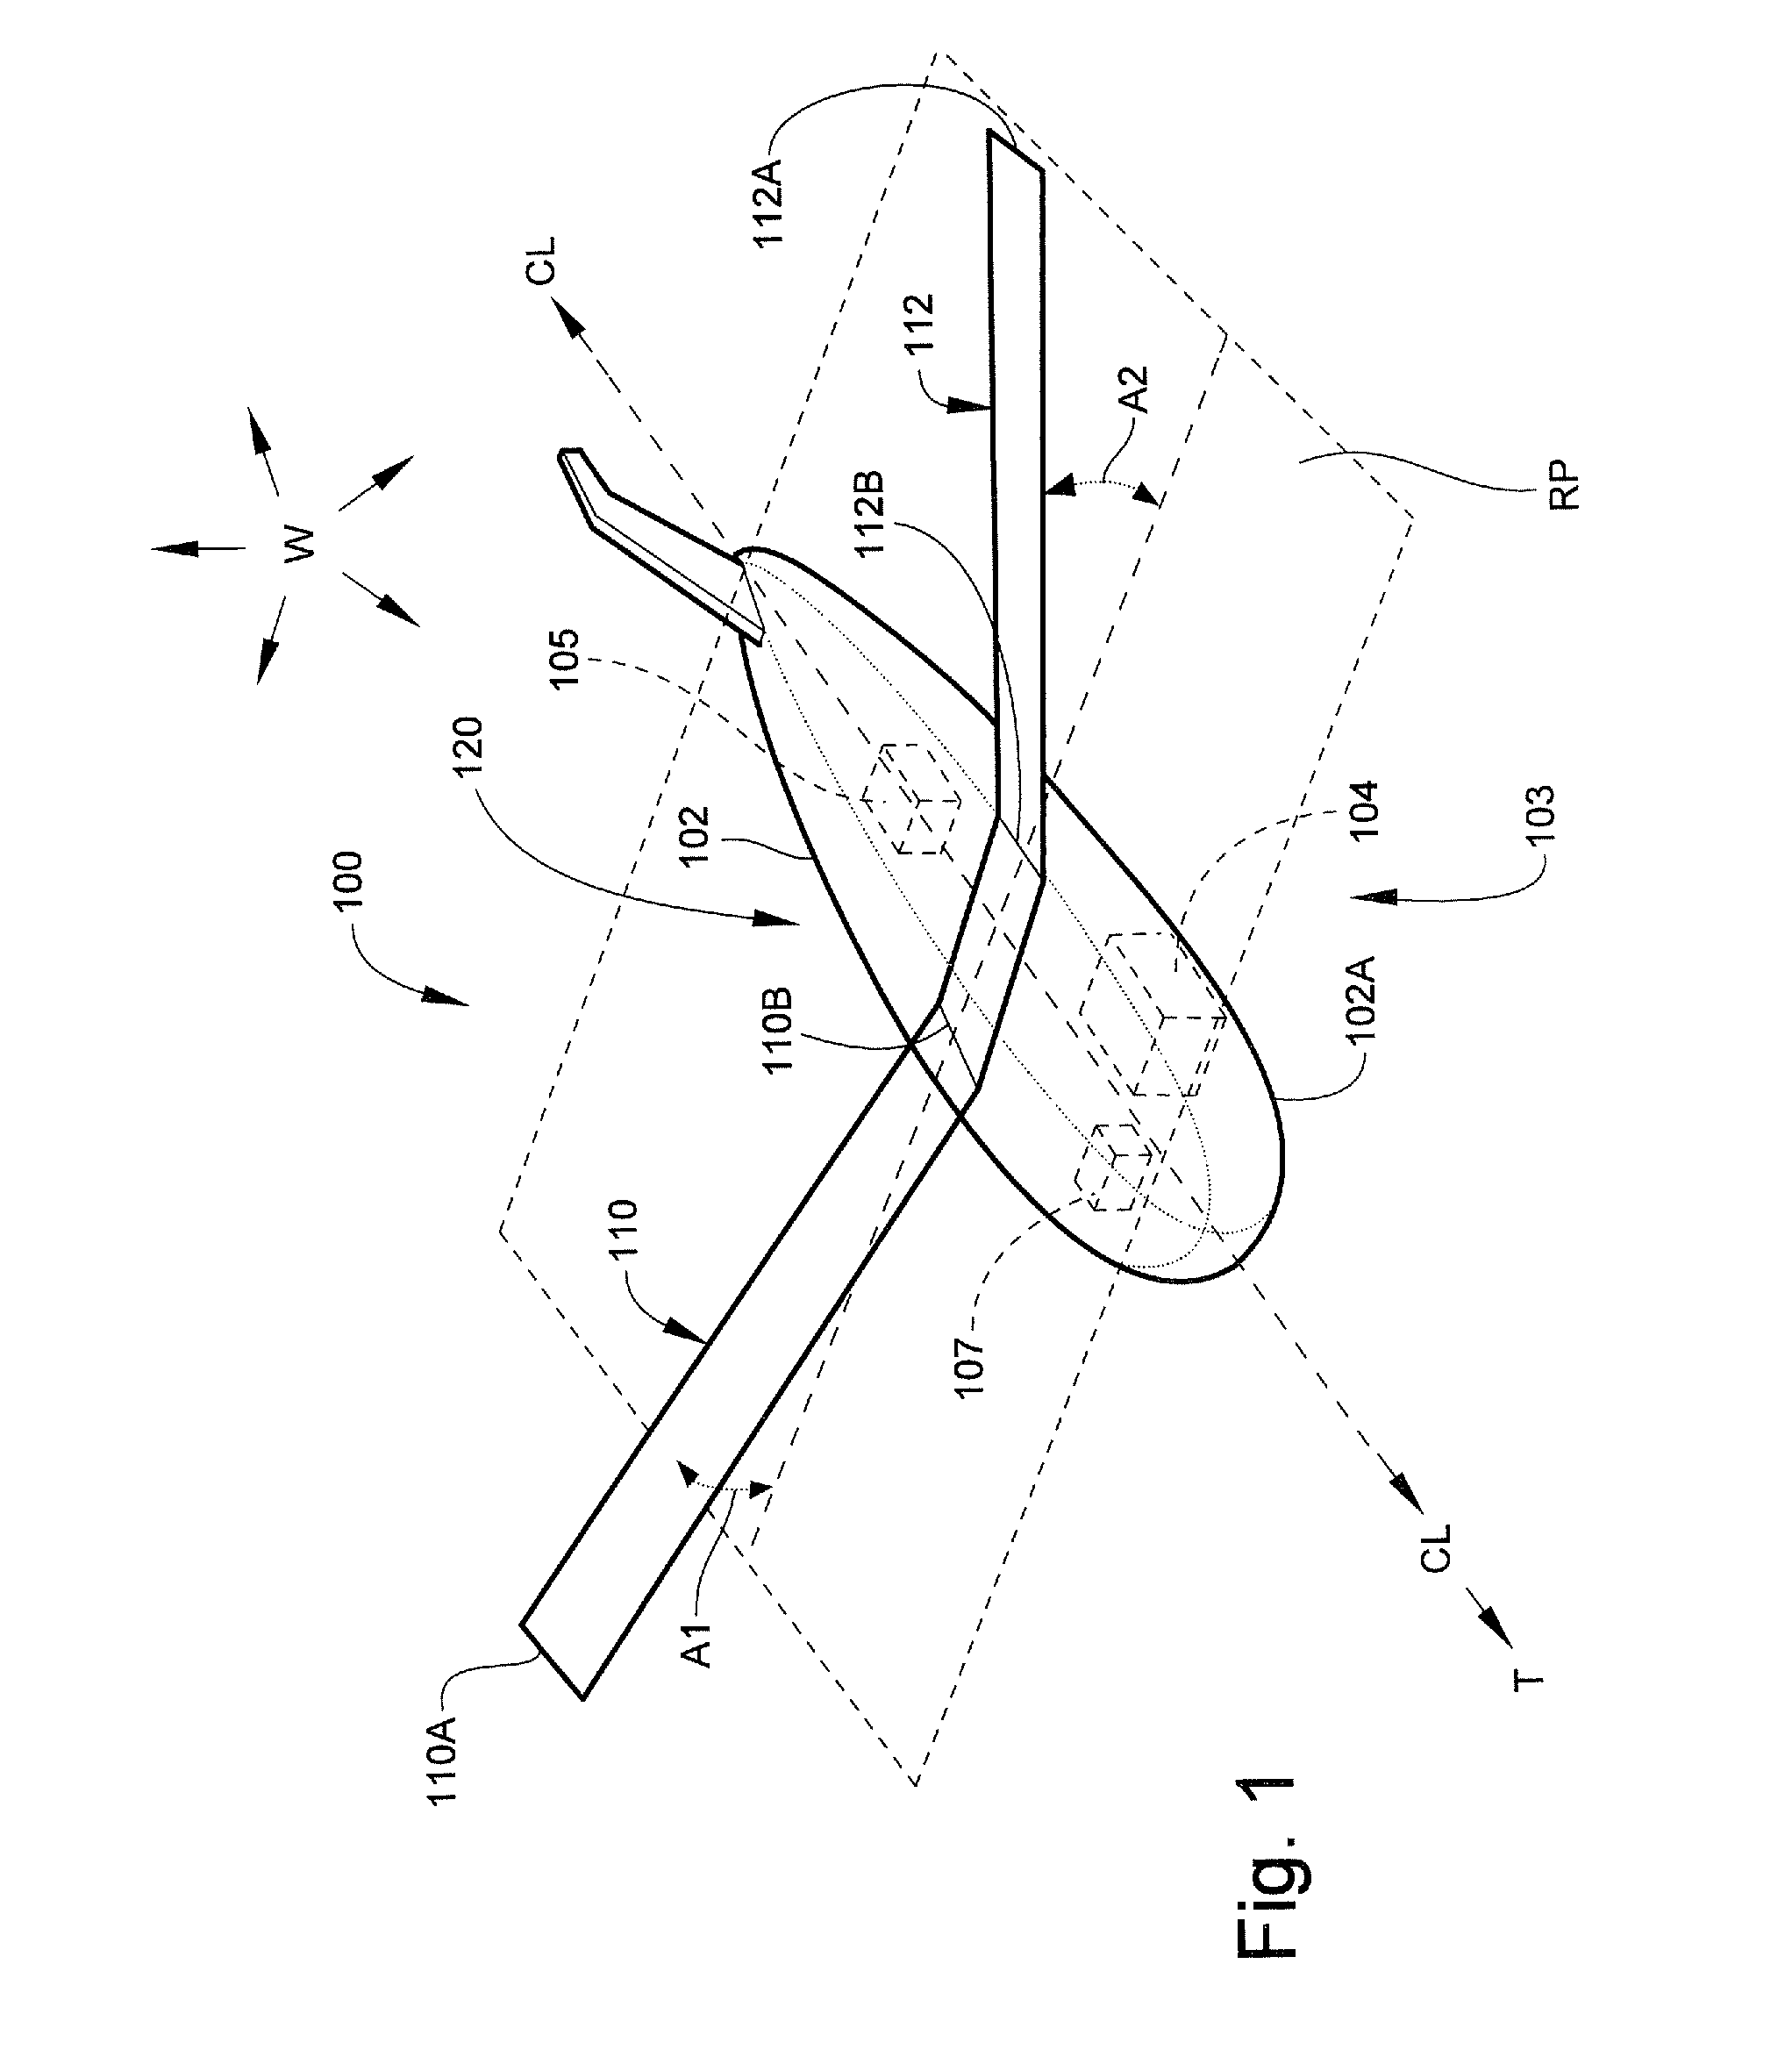 Submersible vehicles and methods for transiting the same in a body of liquid